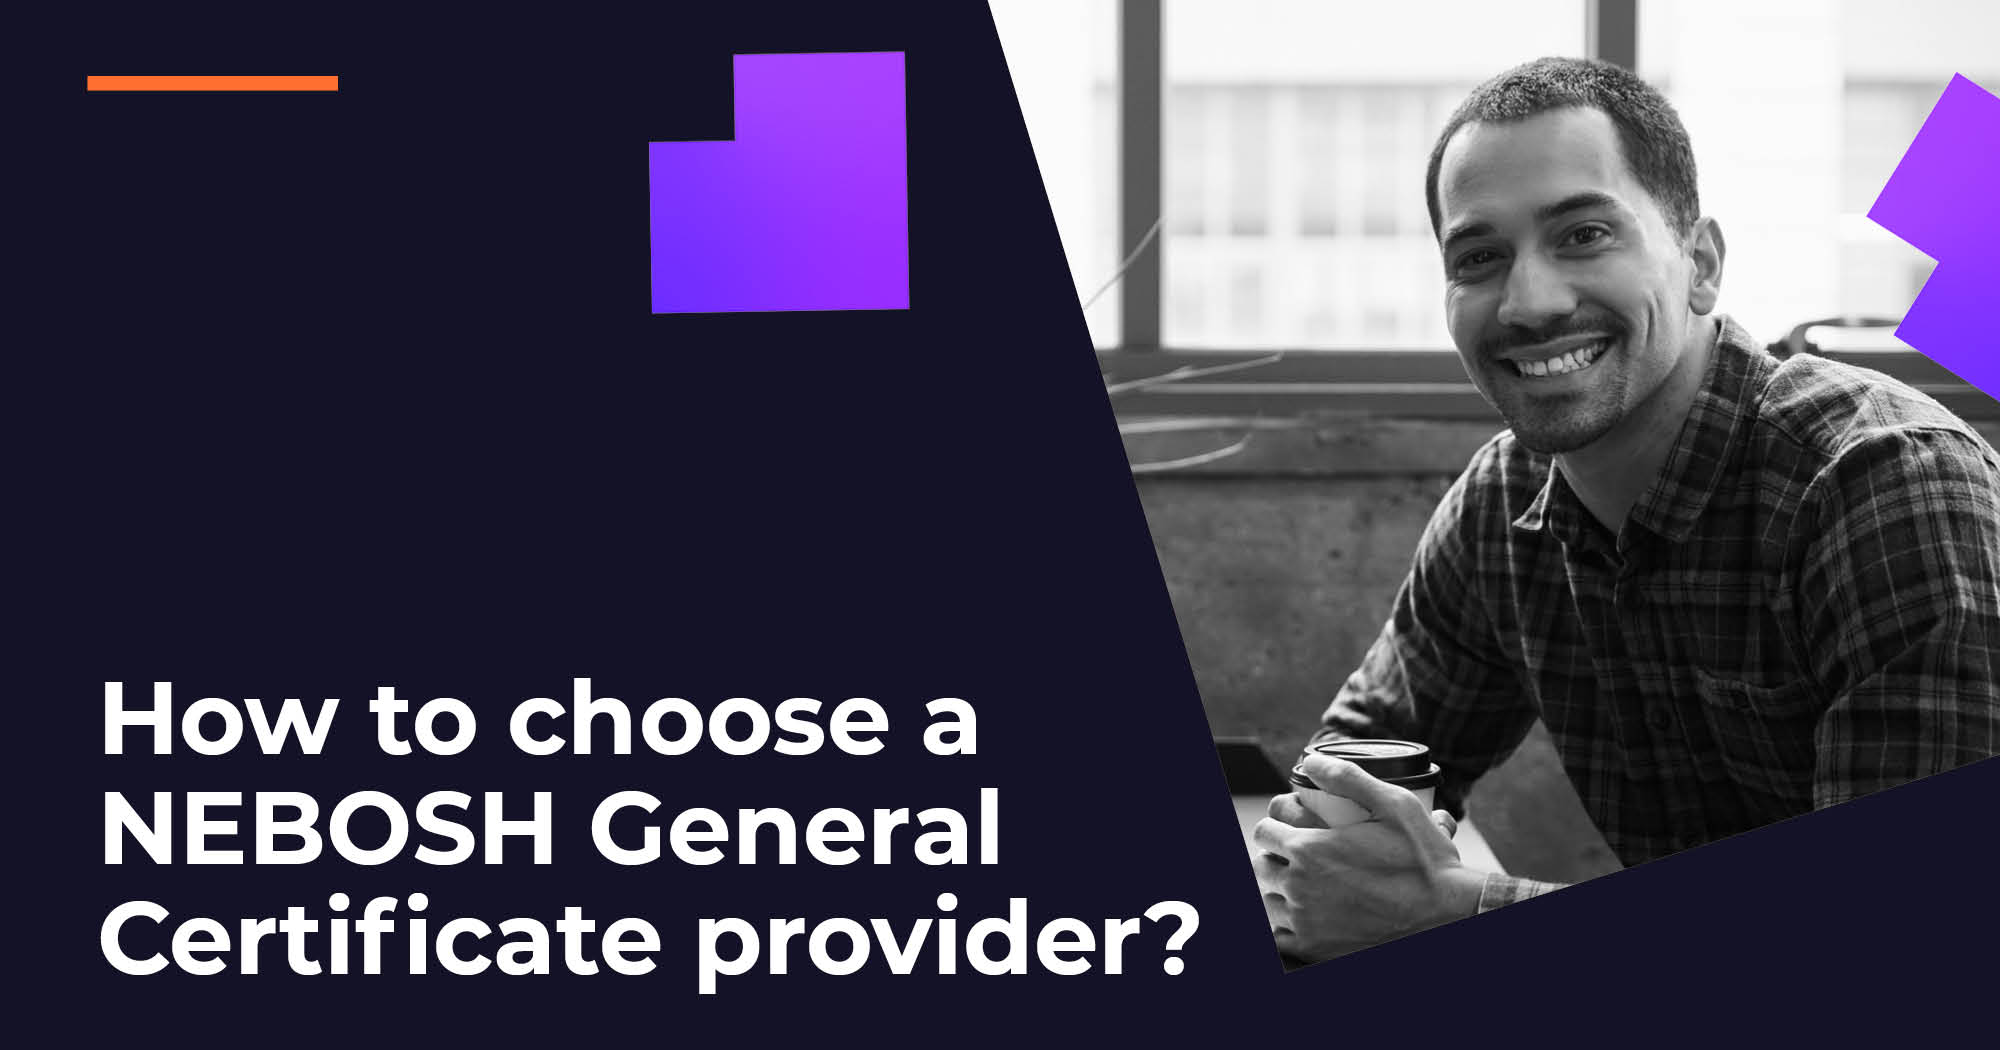 How To Choose A NEBOSH General Certificate Provider? Image